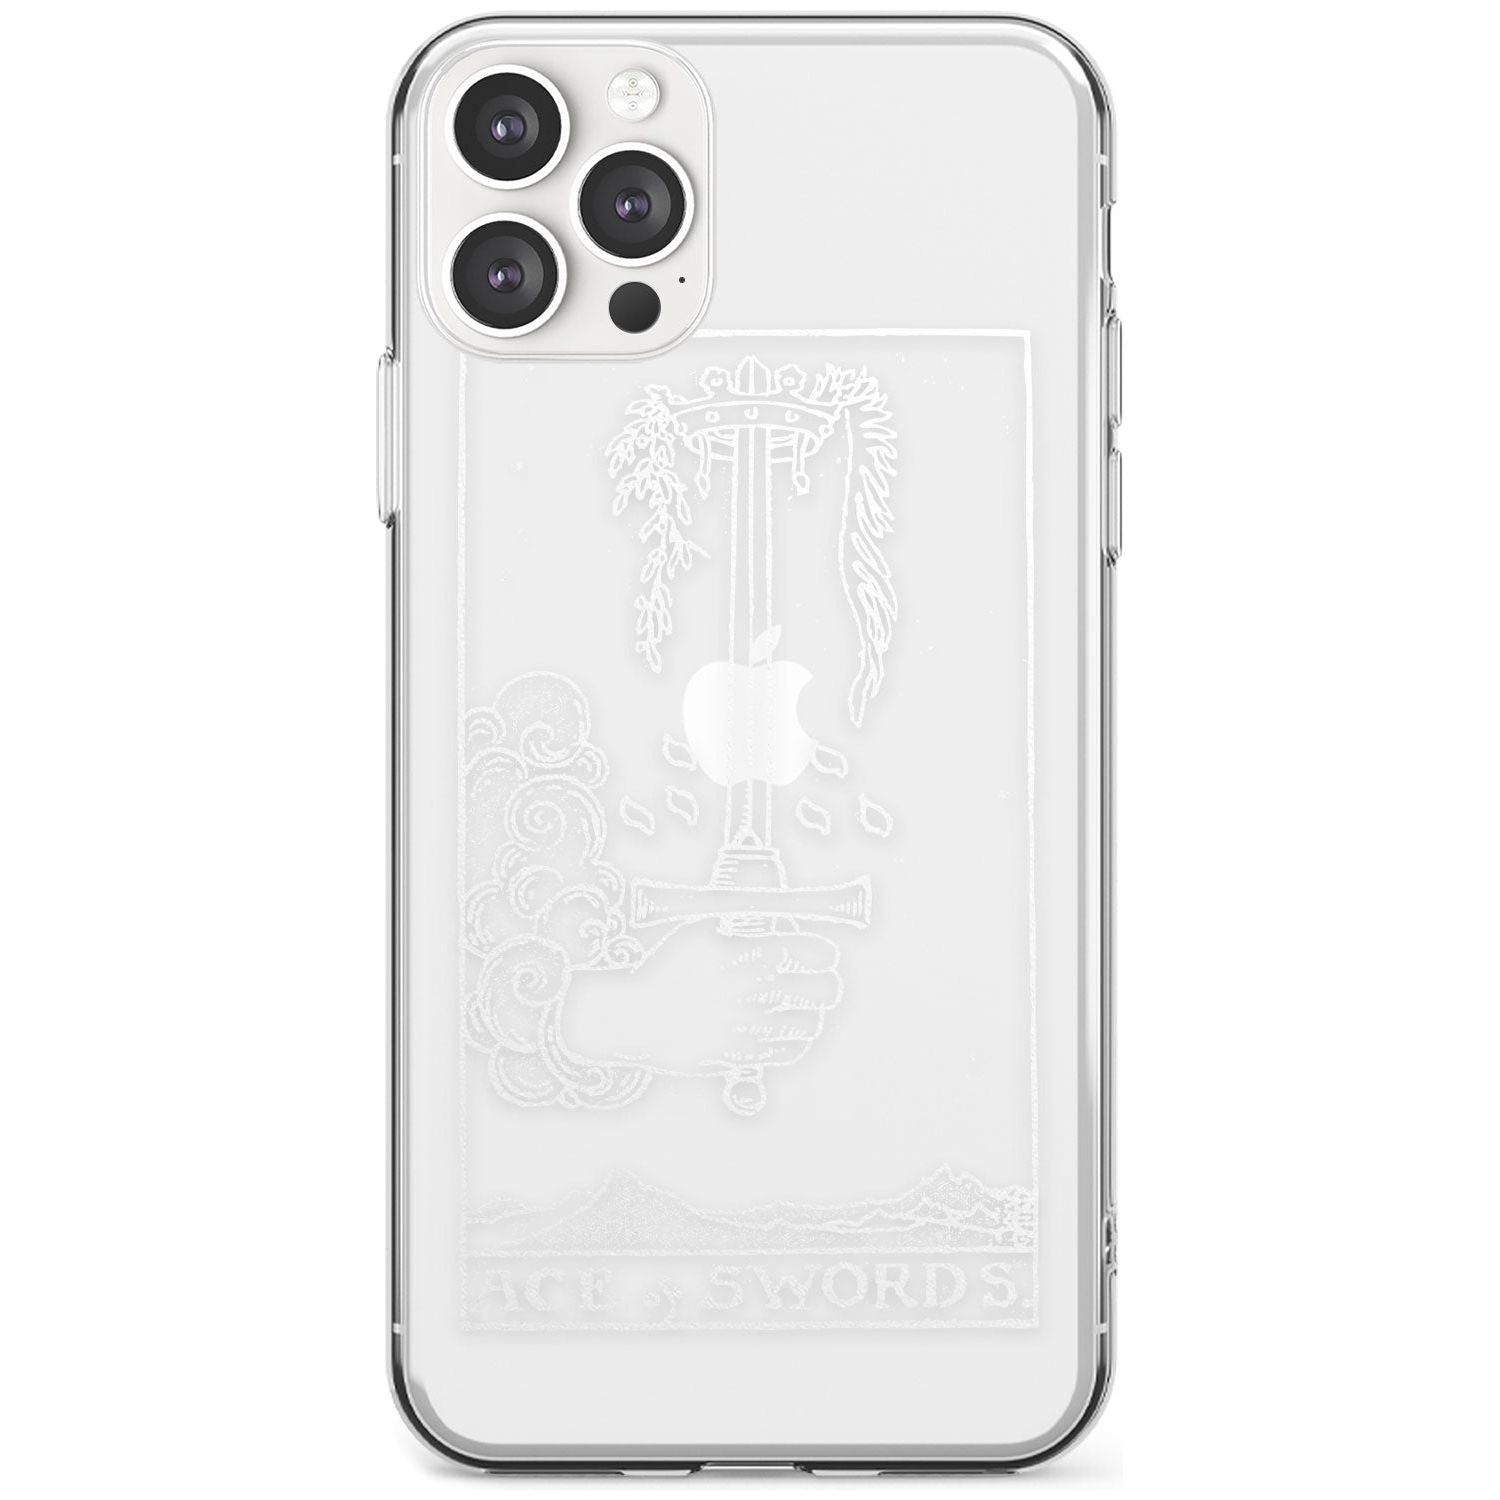 Ace of Swords Tarot Card - White Transparent Black Impact Phone Case for iPhone 11 Pro Max